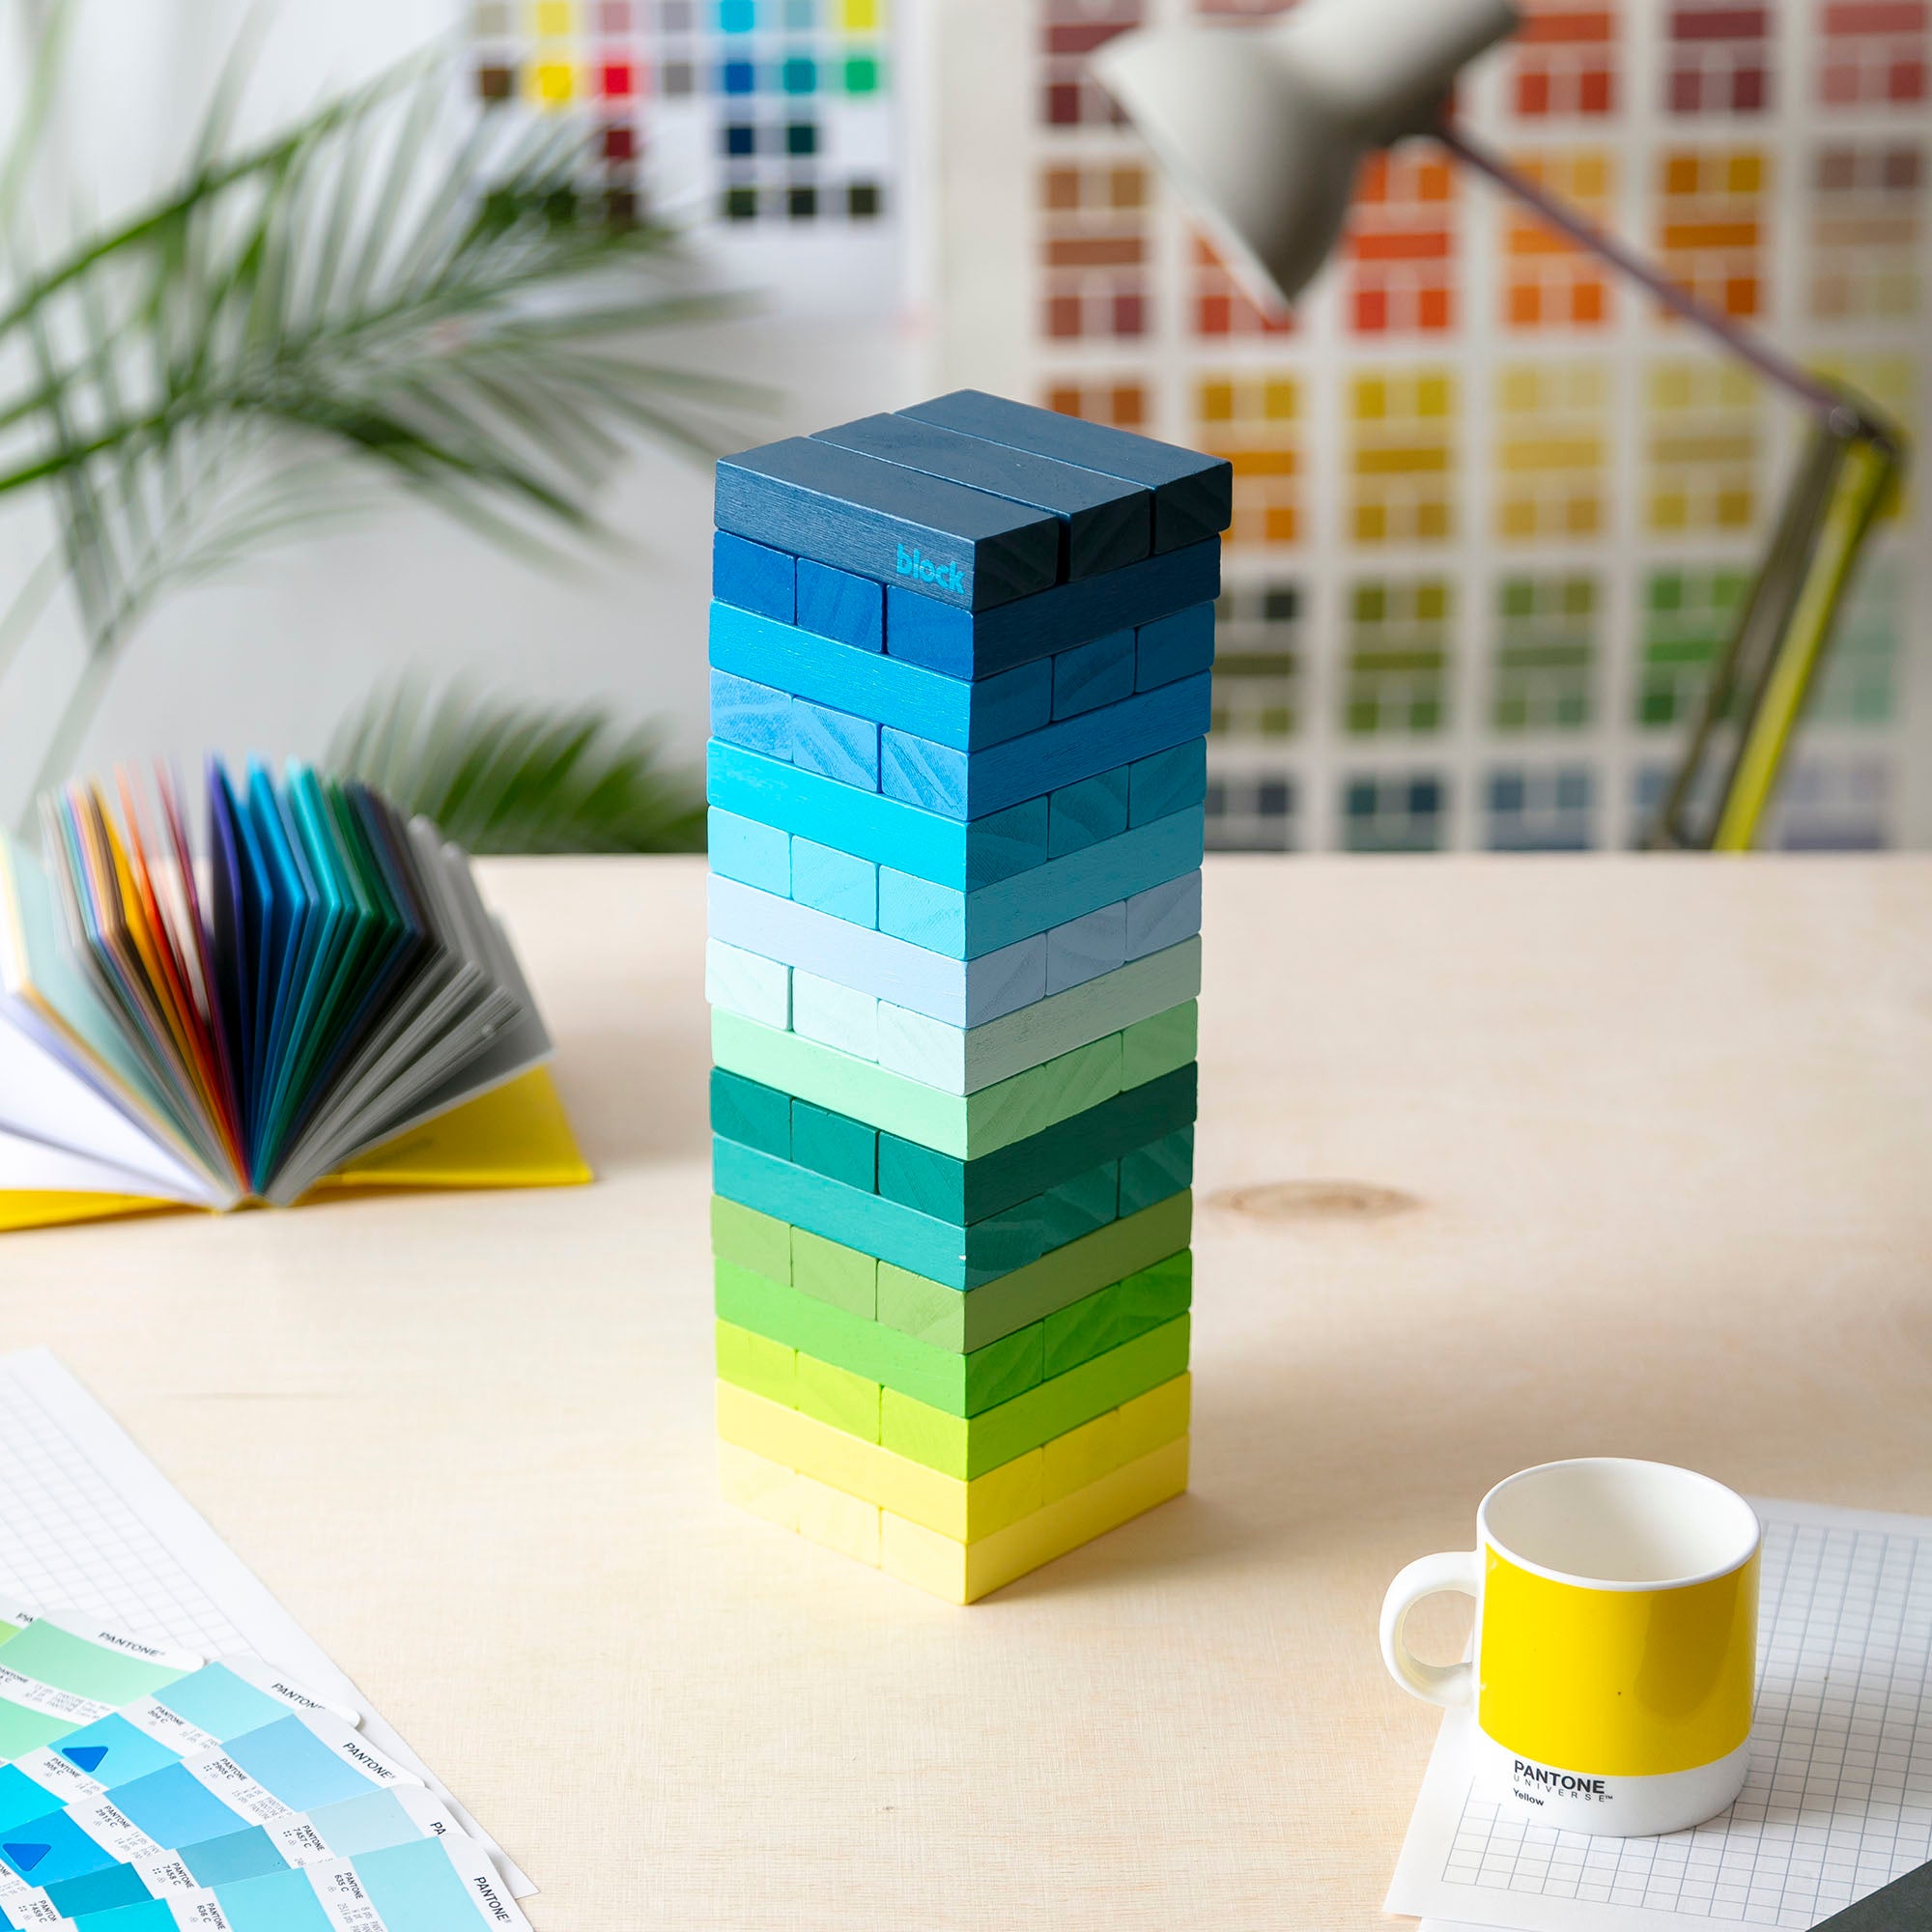 Tumbling Tower with bricks coloured in a cool gradient